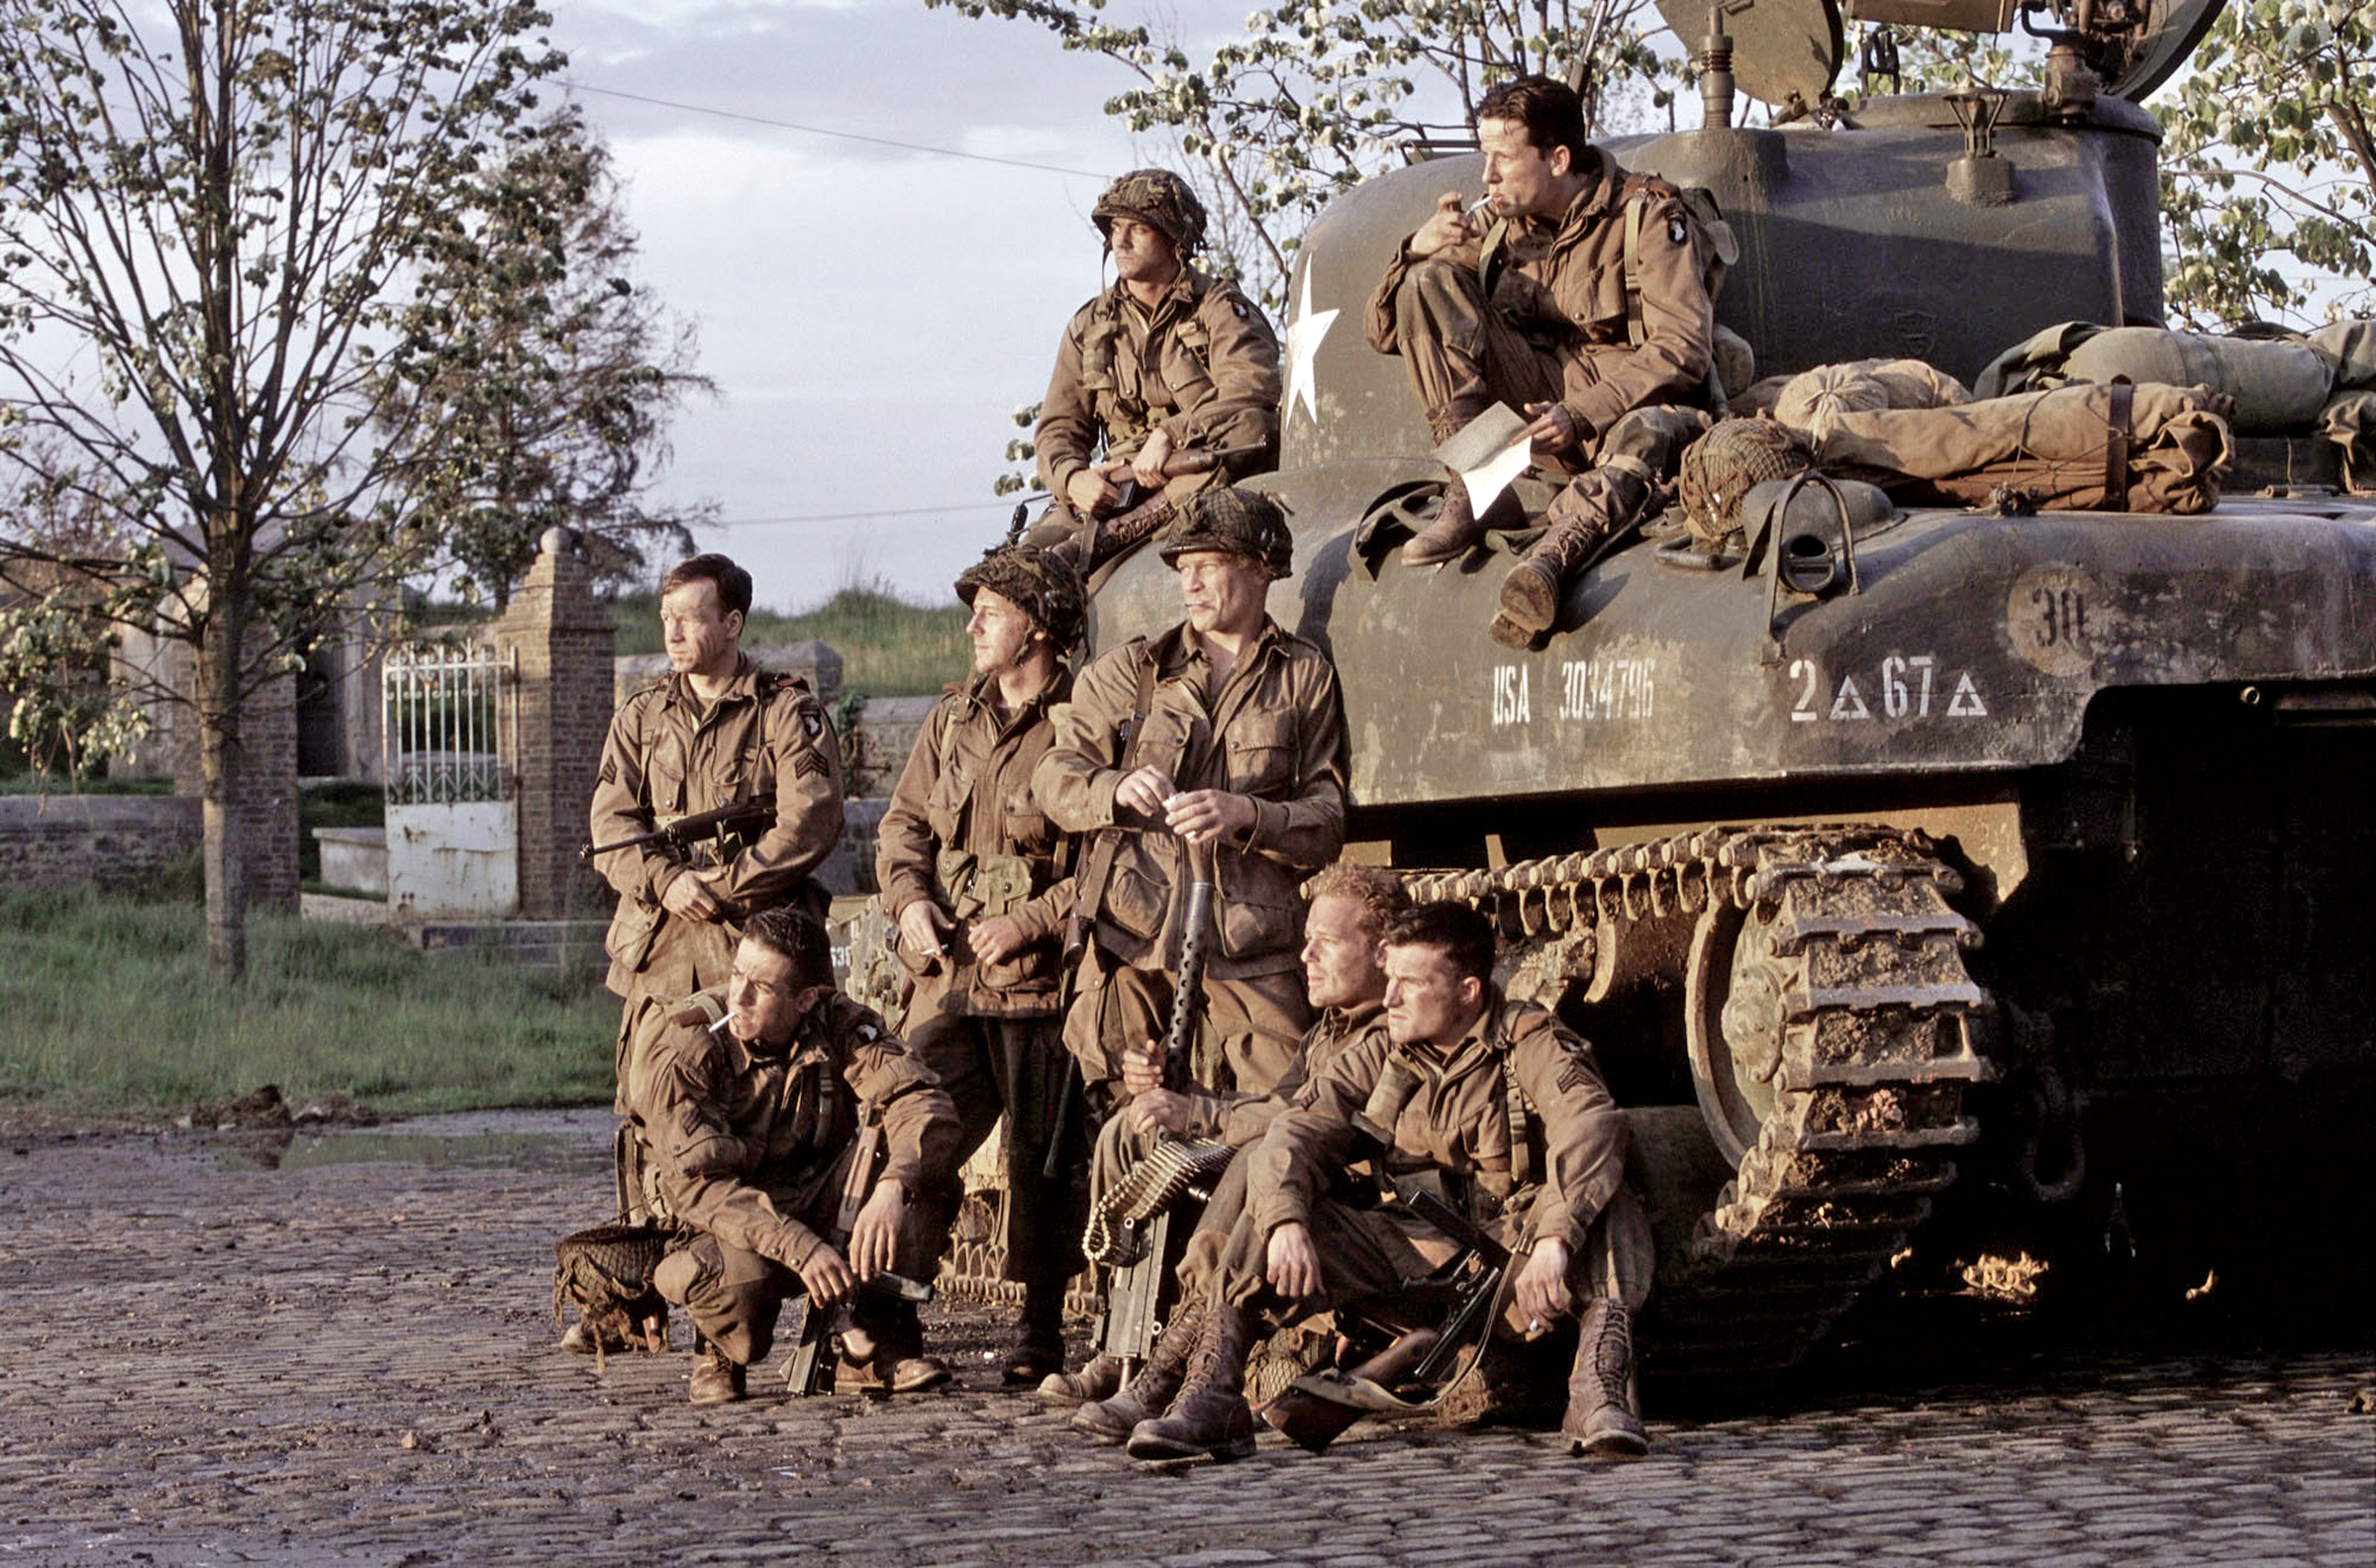 band of brothers, War, Military, Action, Drama, Hbo, Band, Brothers, Soldier, Tank, Weapon Wallpaper